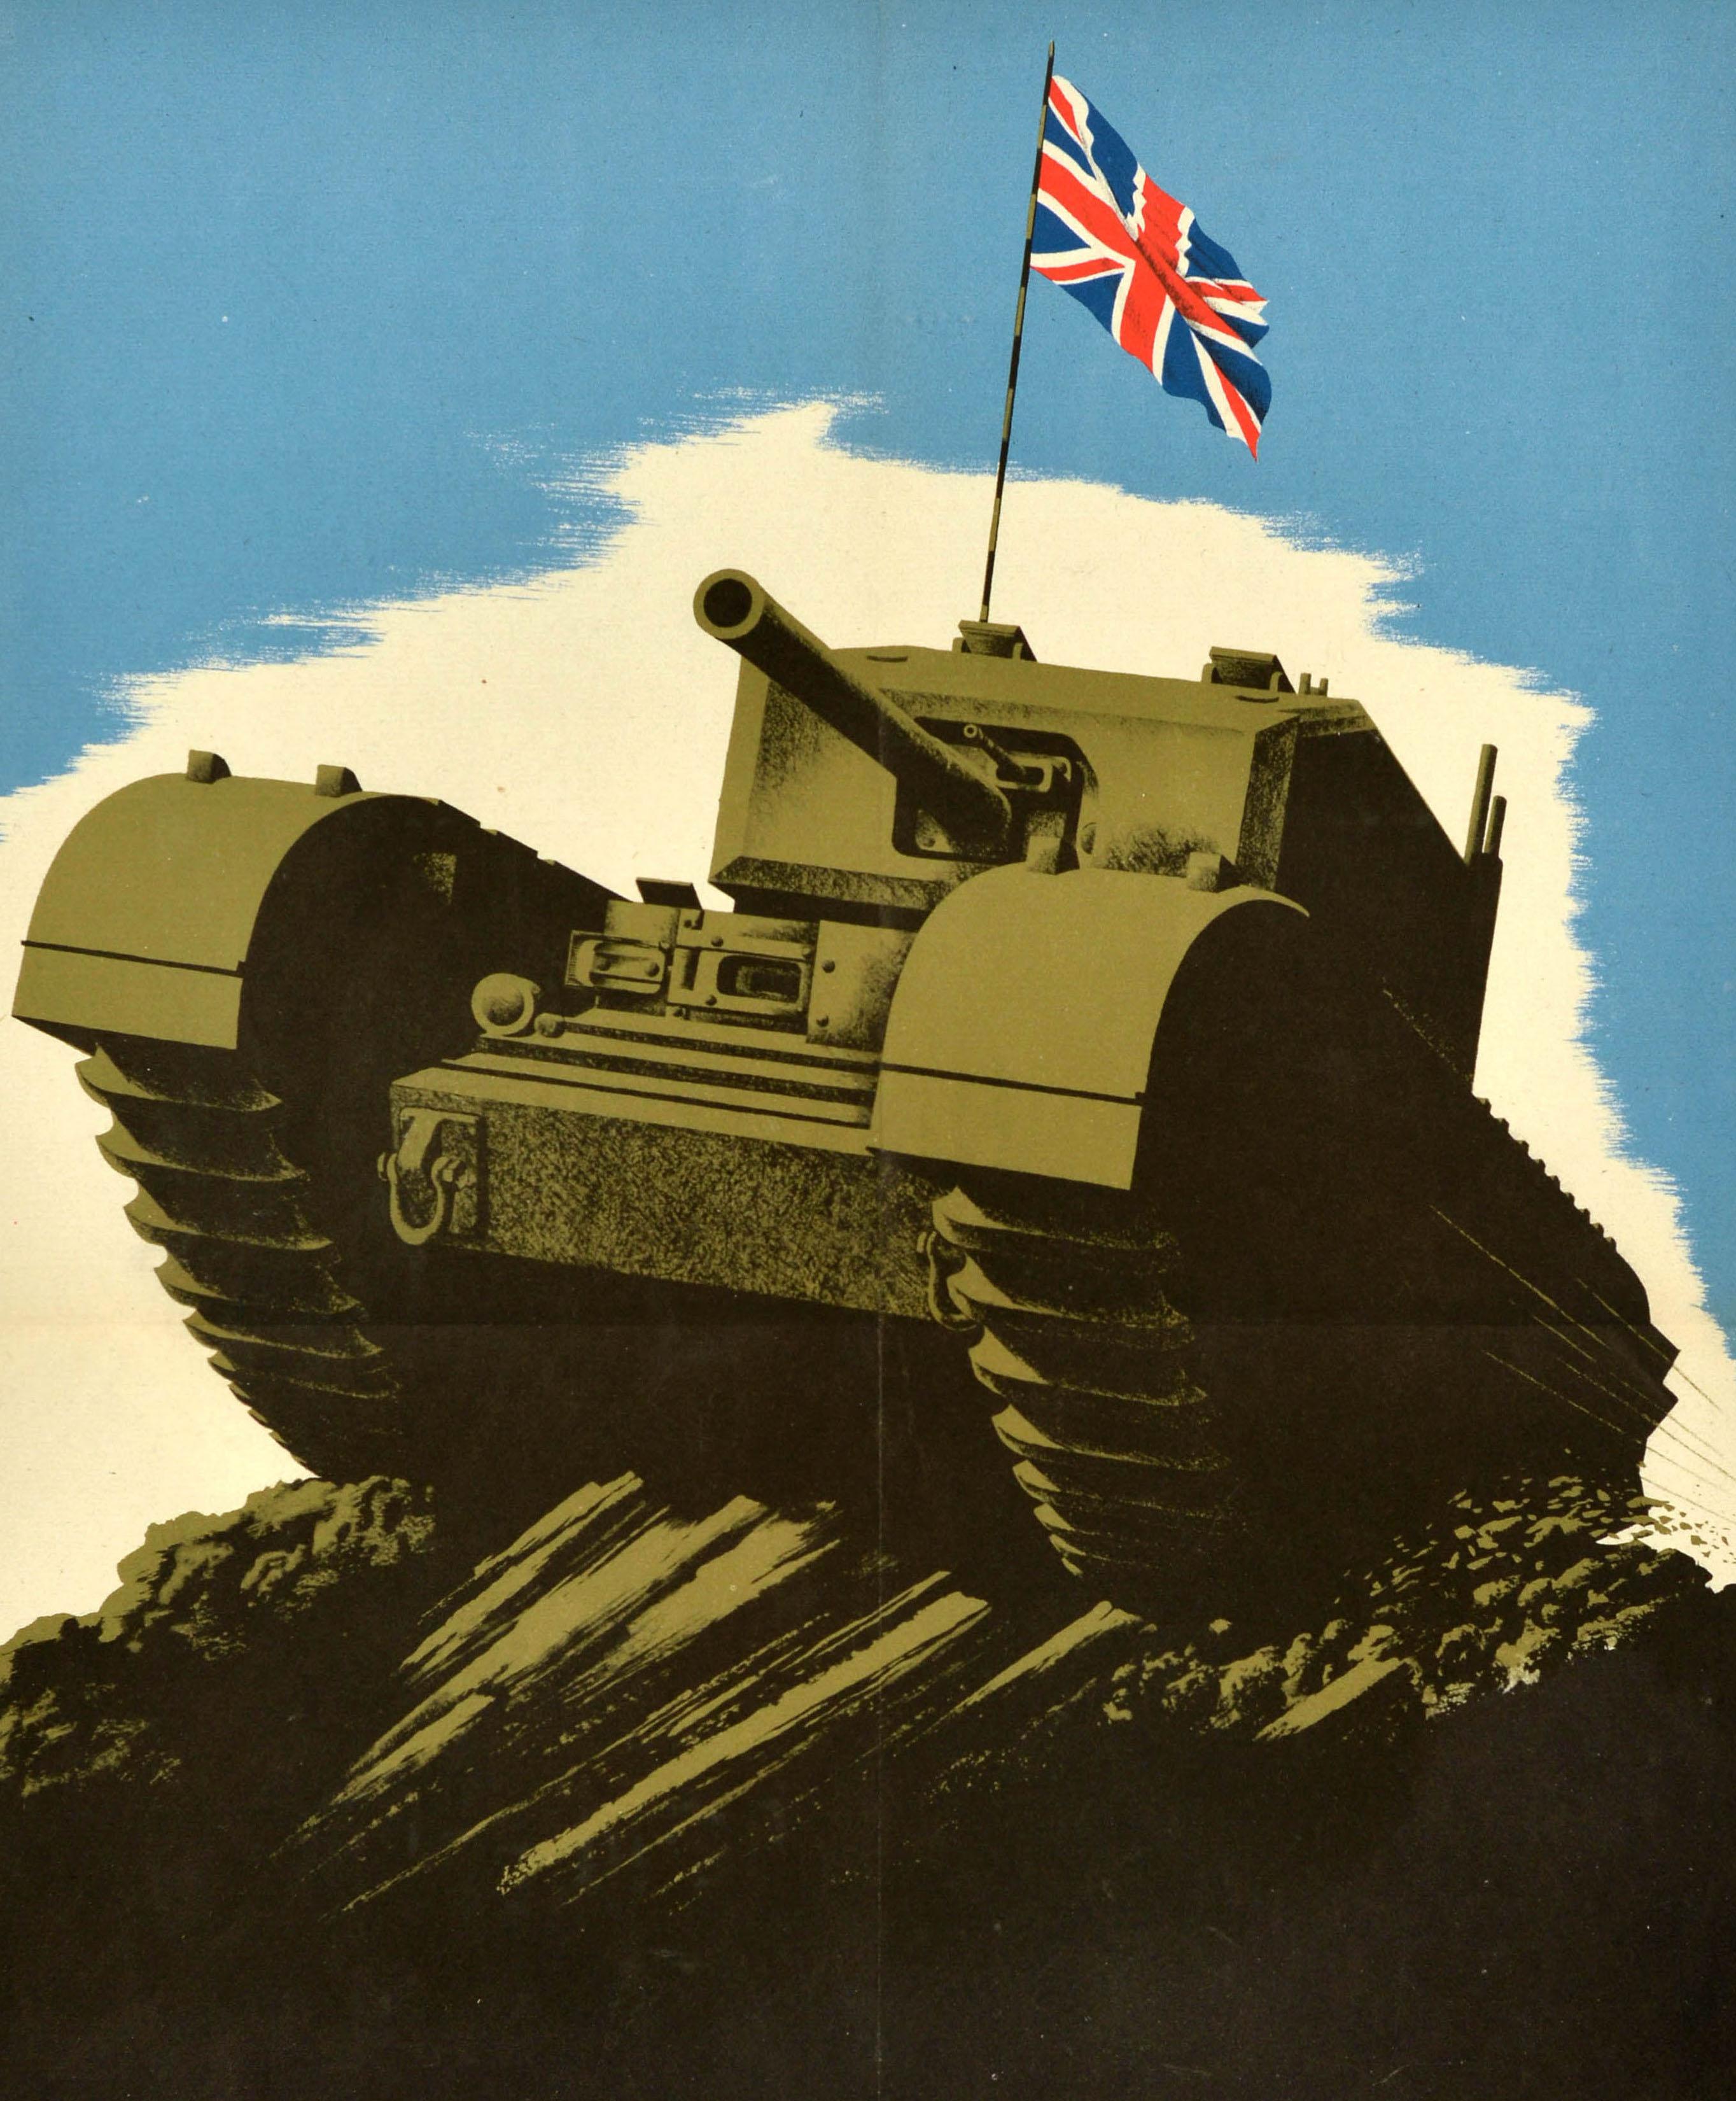 Original vintage World War Two poster featuring an illustration of a military tank driving at speed over a hill with a Union Jack flag of the United Kingdom flying against the blue sky, the title quote by Winston Churchill in bold text on the black